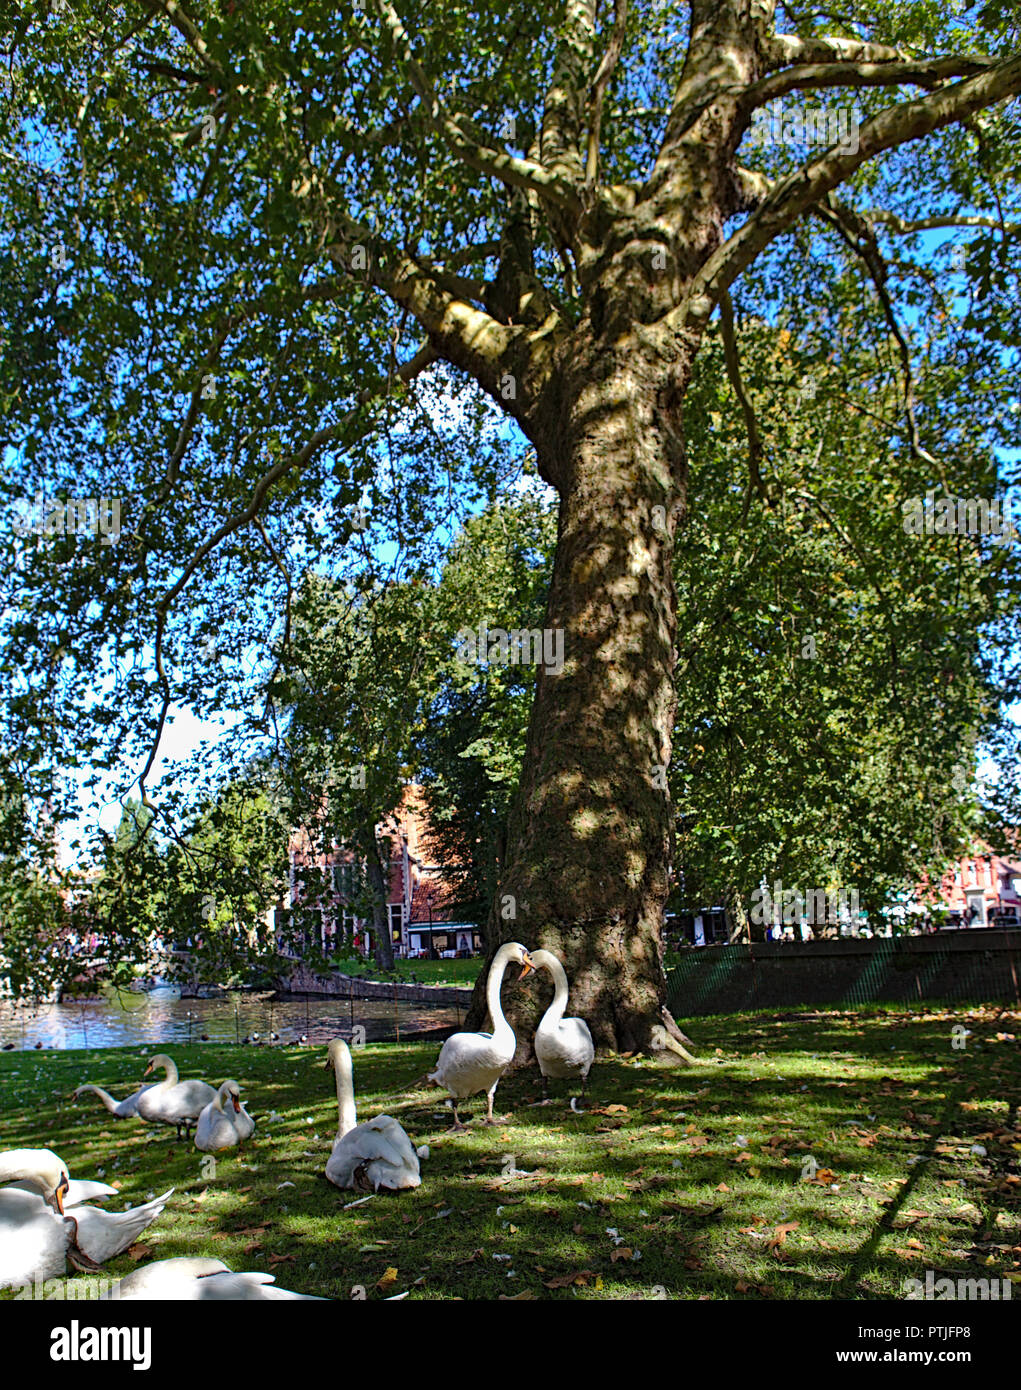 swans on the grass in front of london plane tree Stock Photo